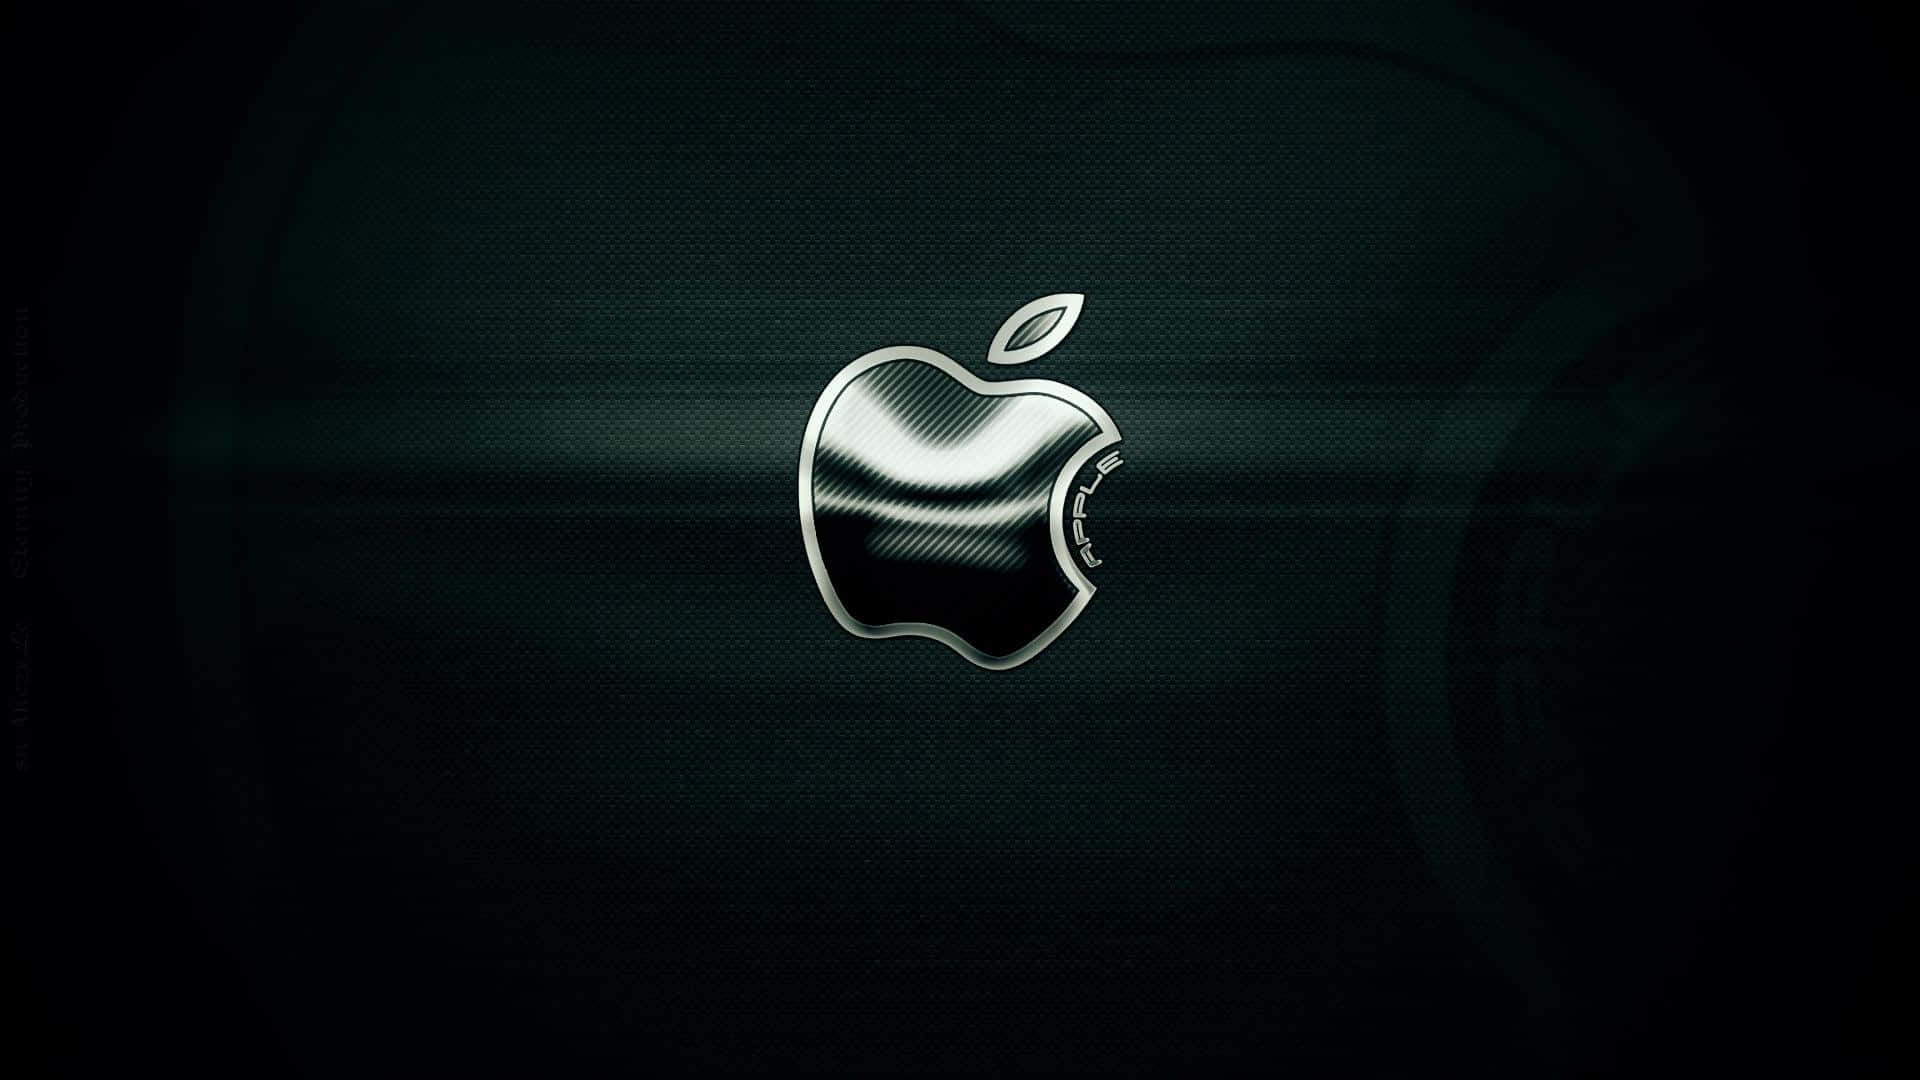 Shiny Black Apple Logo With Silver Outline Wallpaper